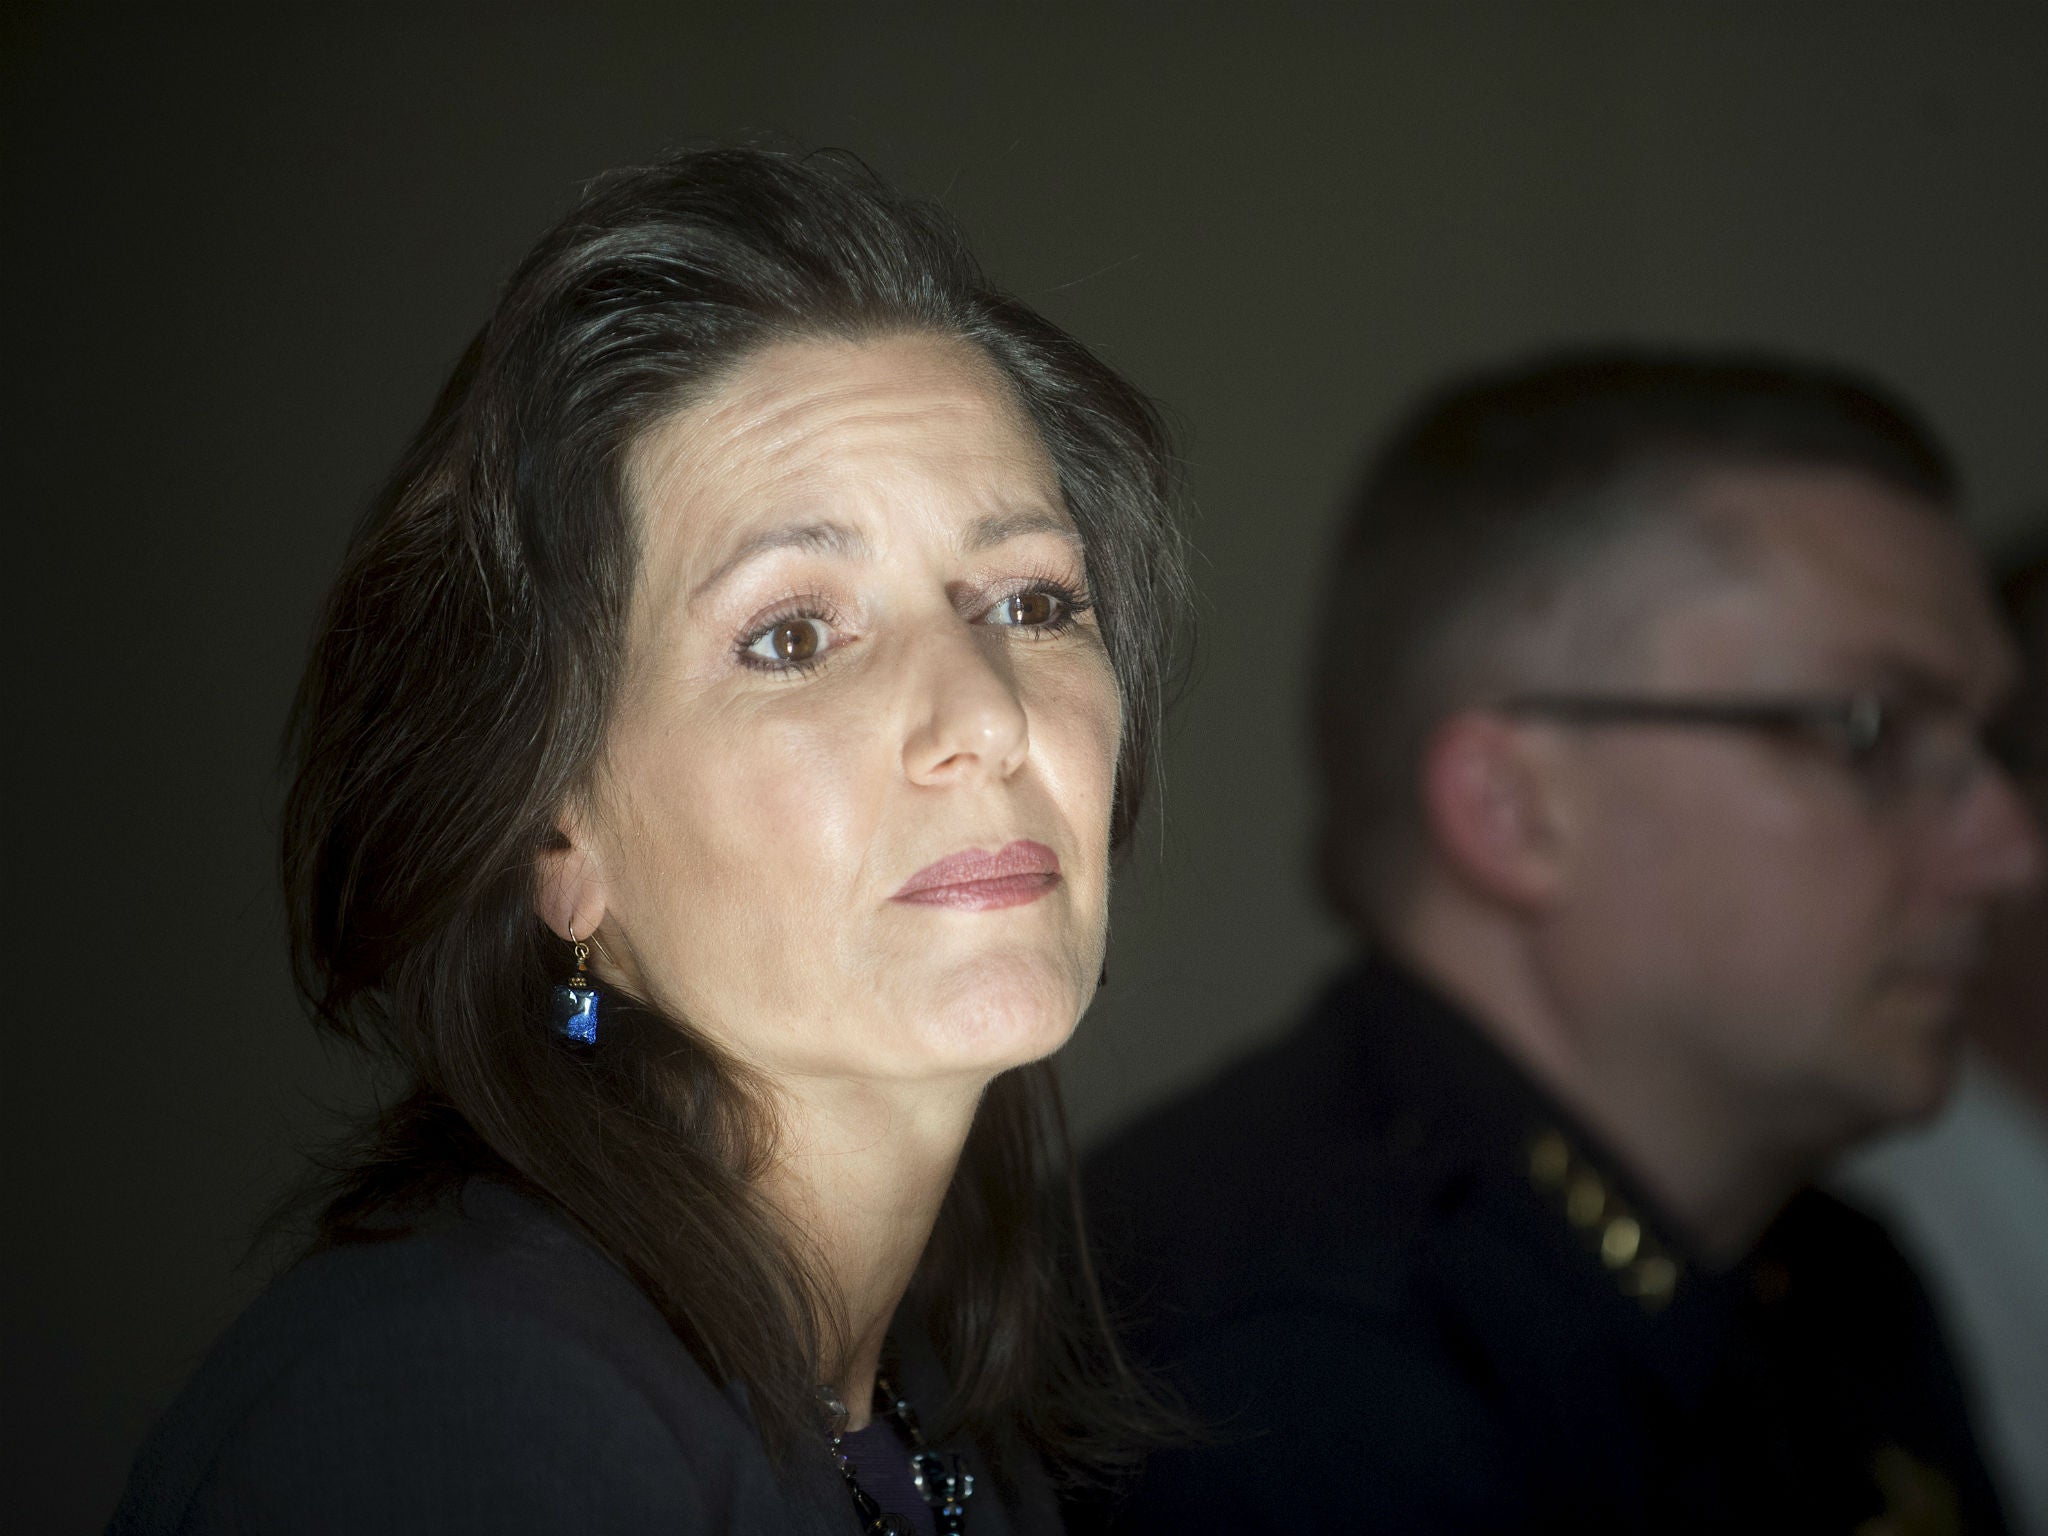 Oakland Mayor Libby Schaaf wrote in an op-ed that 'I am not obstructing justice. I am seeking it'.